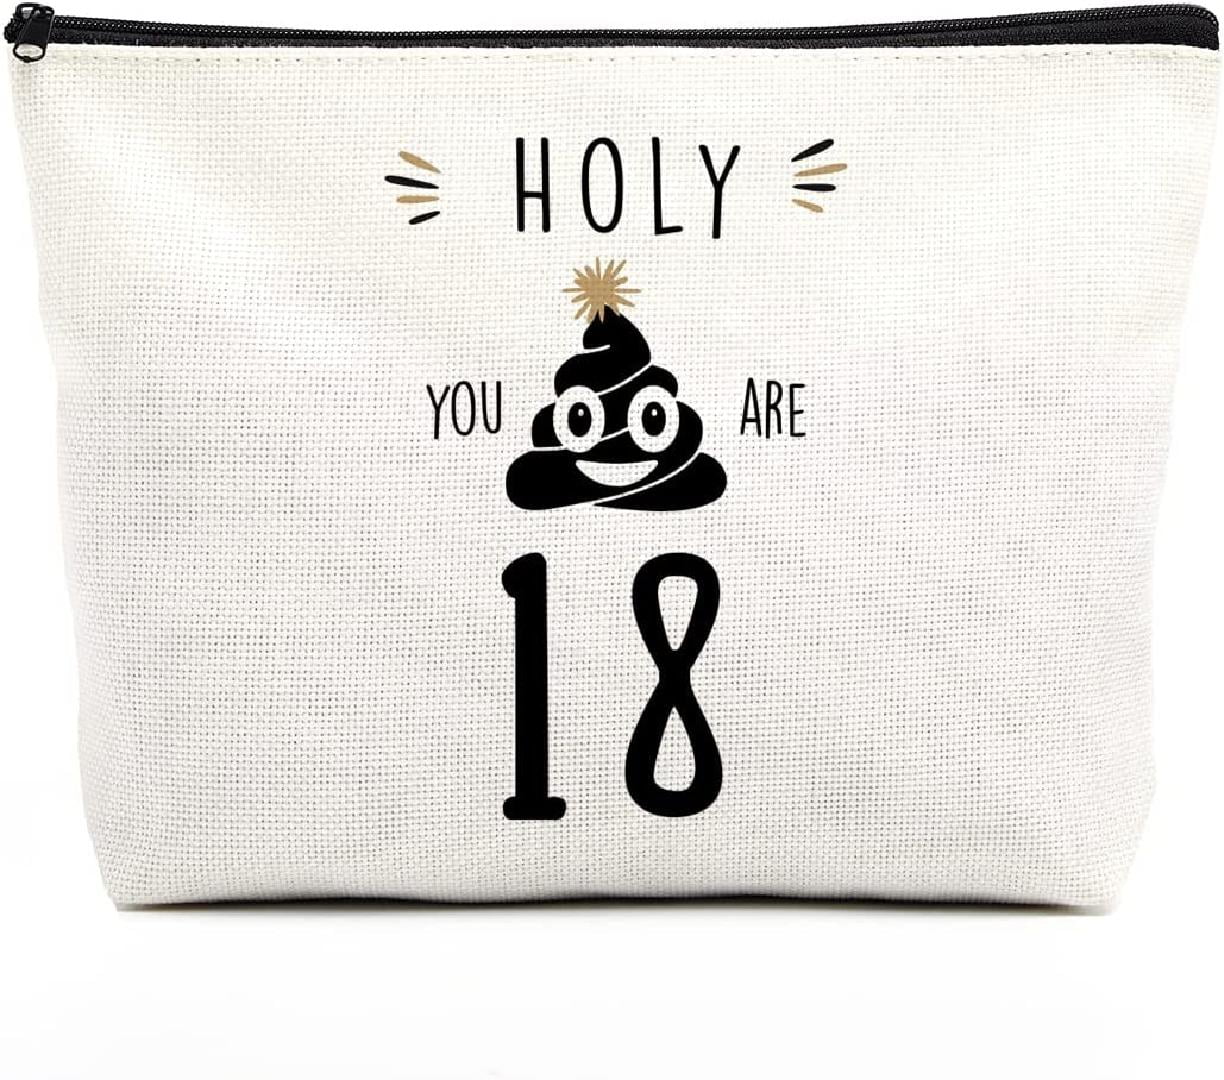 18 Year Old Girl Birthday Gifts Happy Birthday Makeup Bag Funny 18th  Birthday Gifts for Girls from Mom Humorous Birthday Decorations Gift Ideas  for Women Her Teen Girl Daughter Sister Holy You